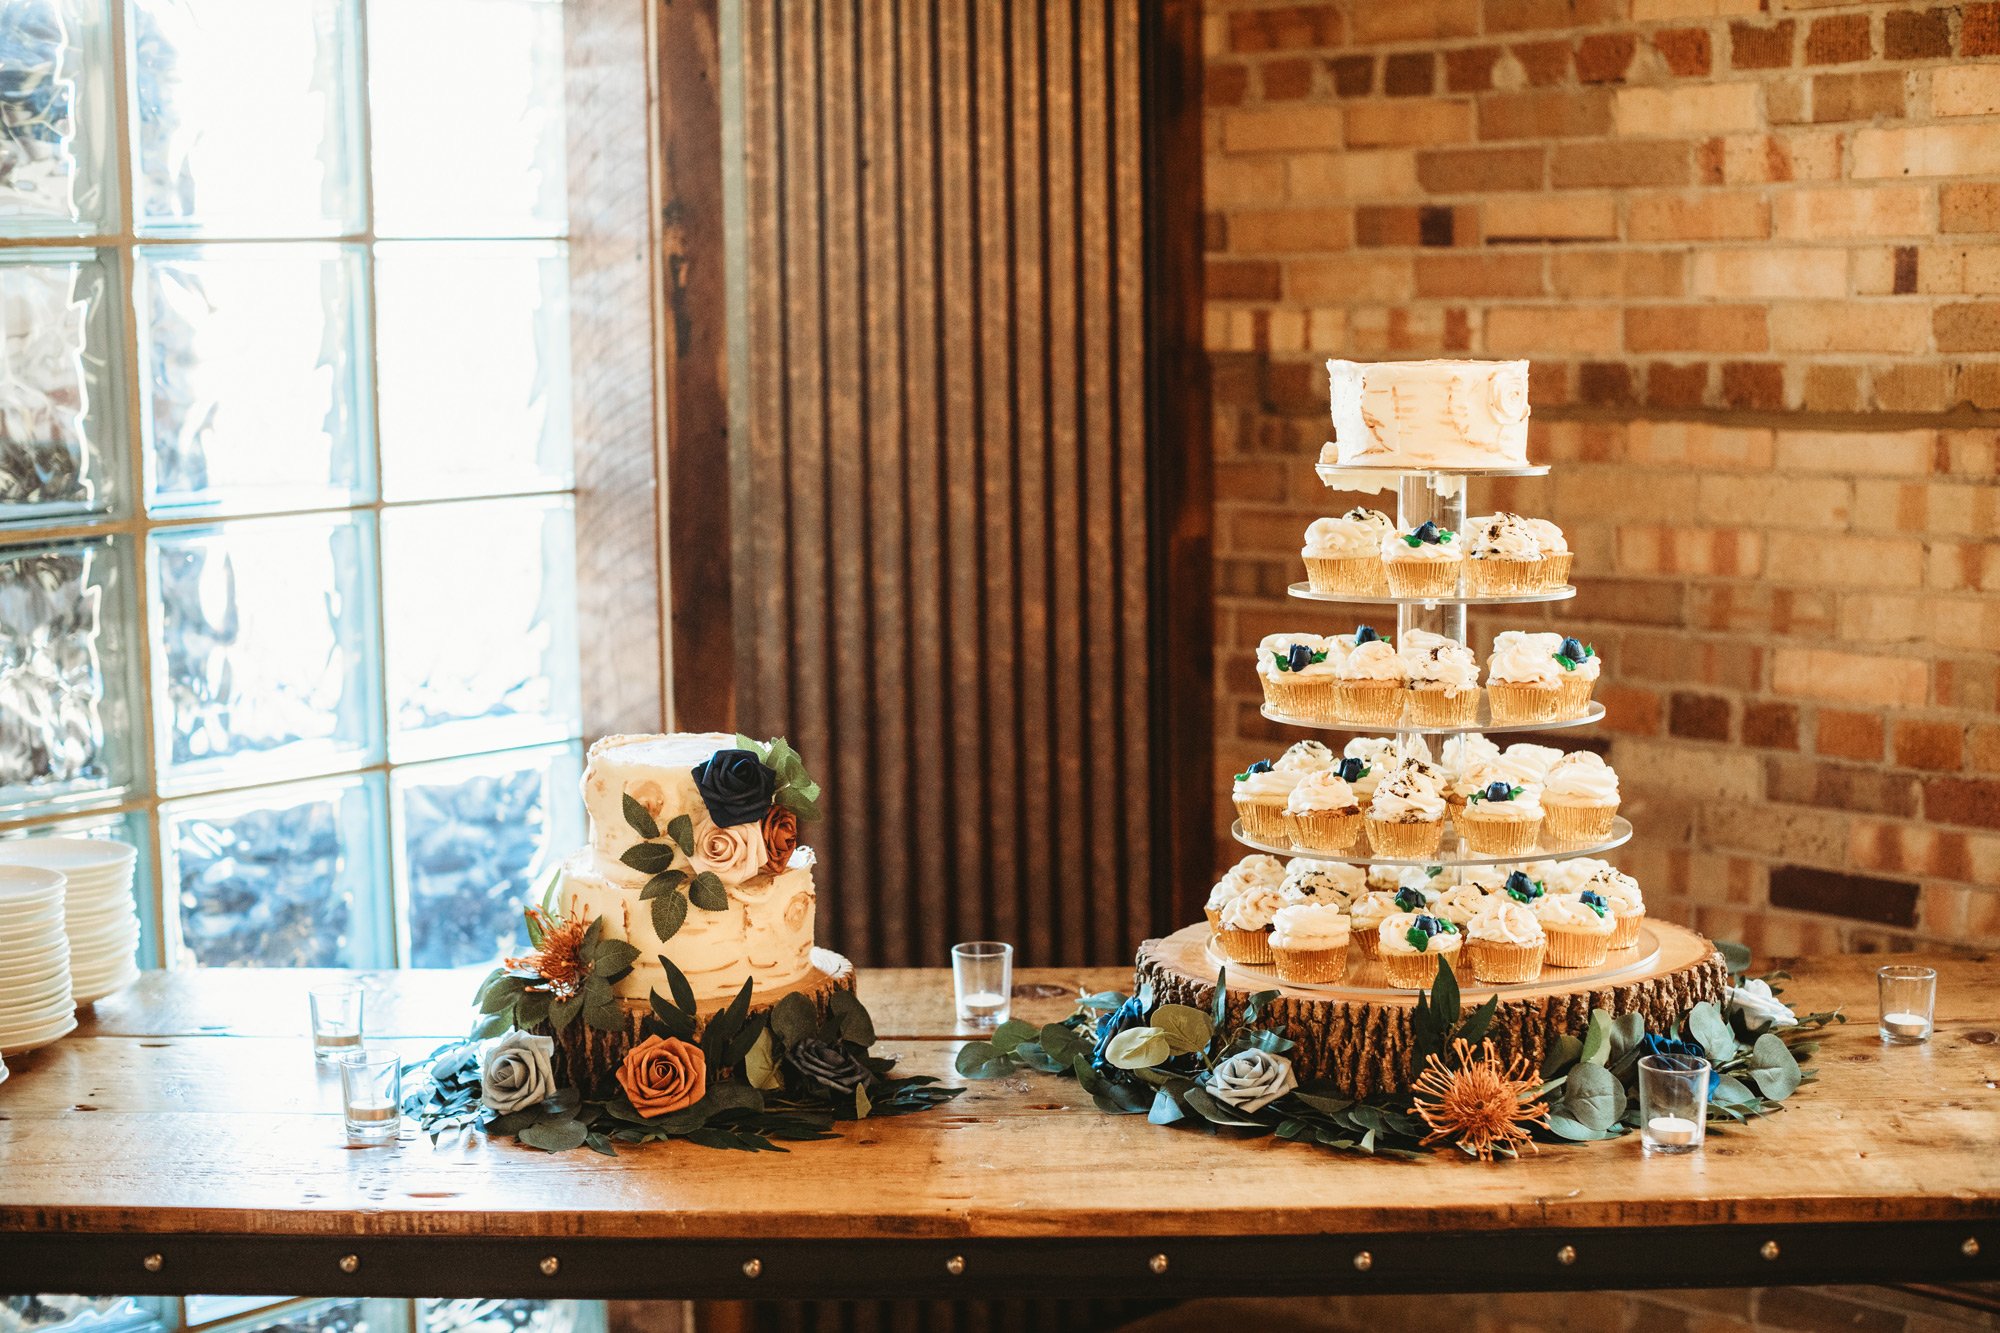  Rustic wedding cake with a cupcake display next to it for guests captured by Teala Ward Photography. wedding cake cupcake #TealaWardPhotography #TealaWardWeddings #WeddingLocationsIllinois #IllinoisWedding #weddingdetails #weddingphotography #marrie